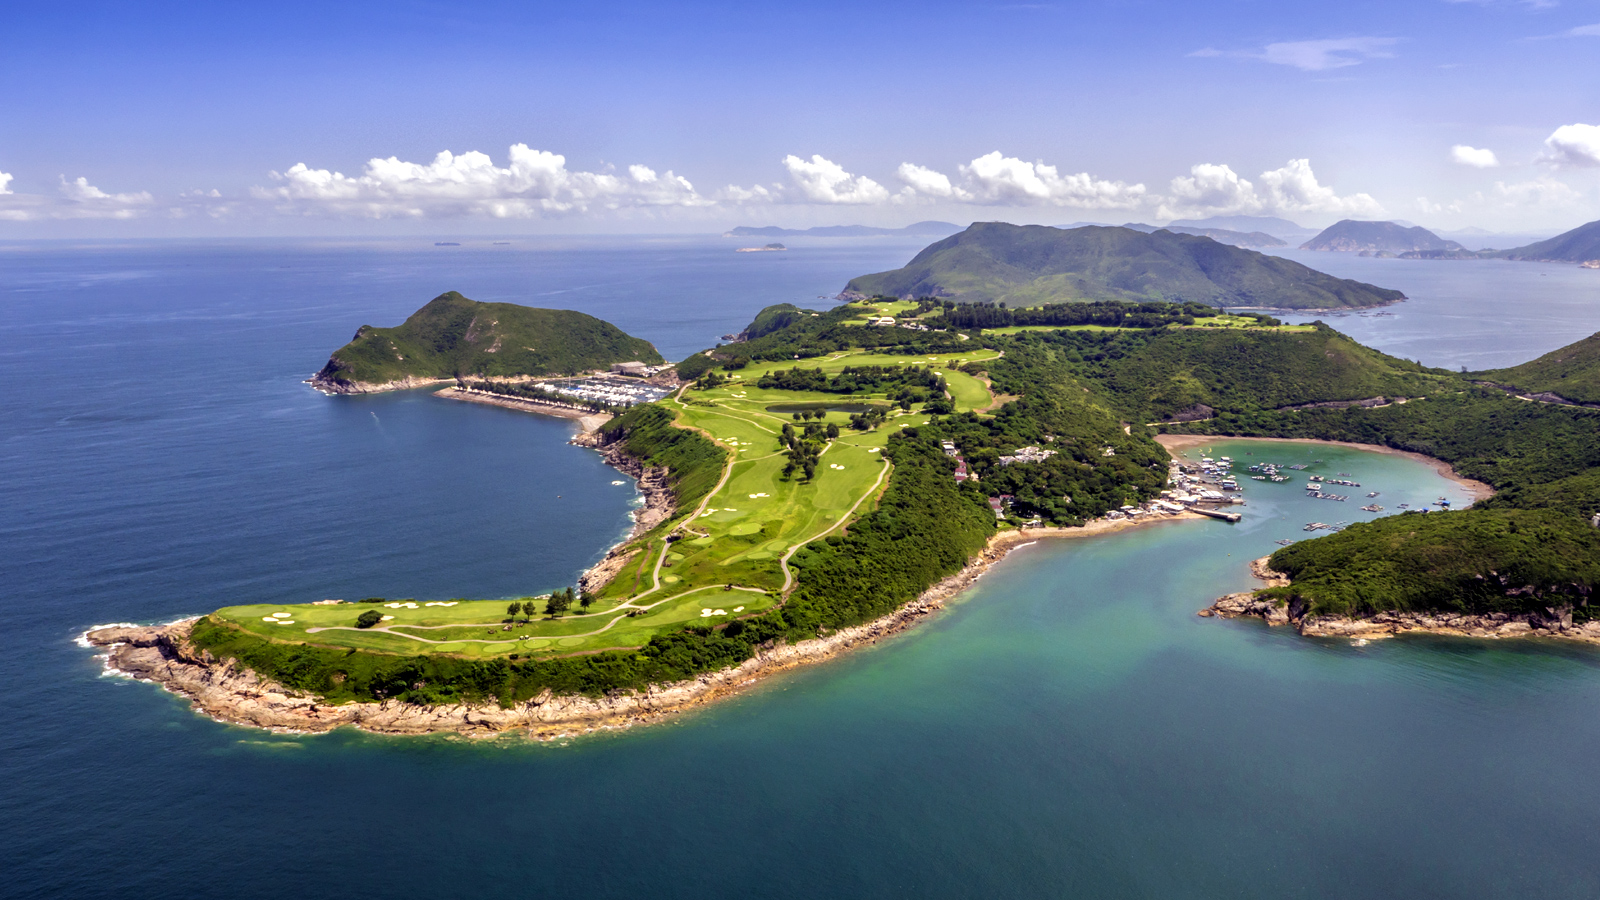 PAGE 4: Most expensive golf courses in the world